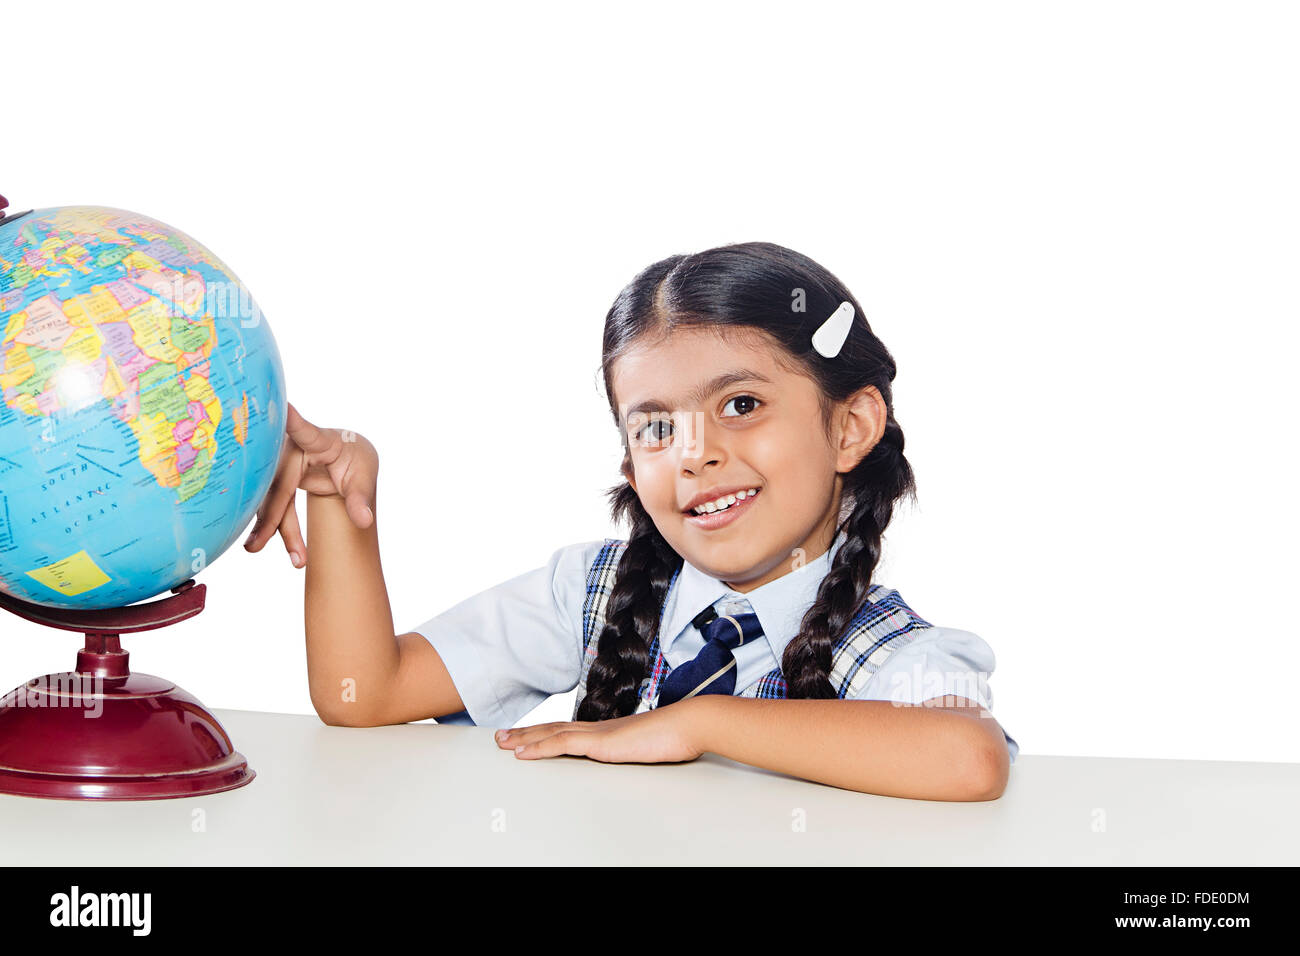 1 Person Only Education Girl Kid School Searching Smiling Student Studying World Globe Stock Photo